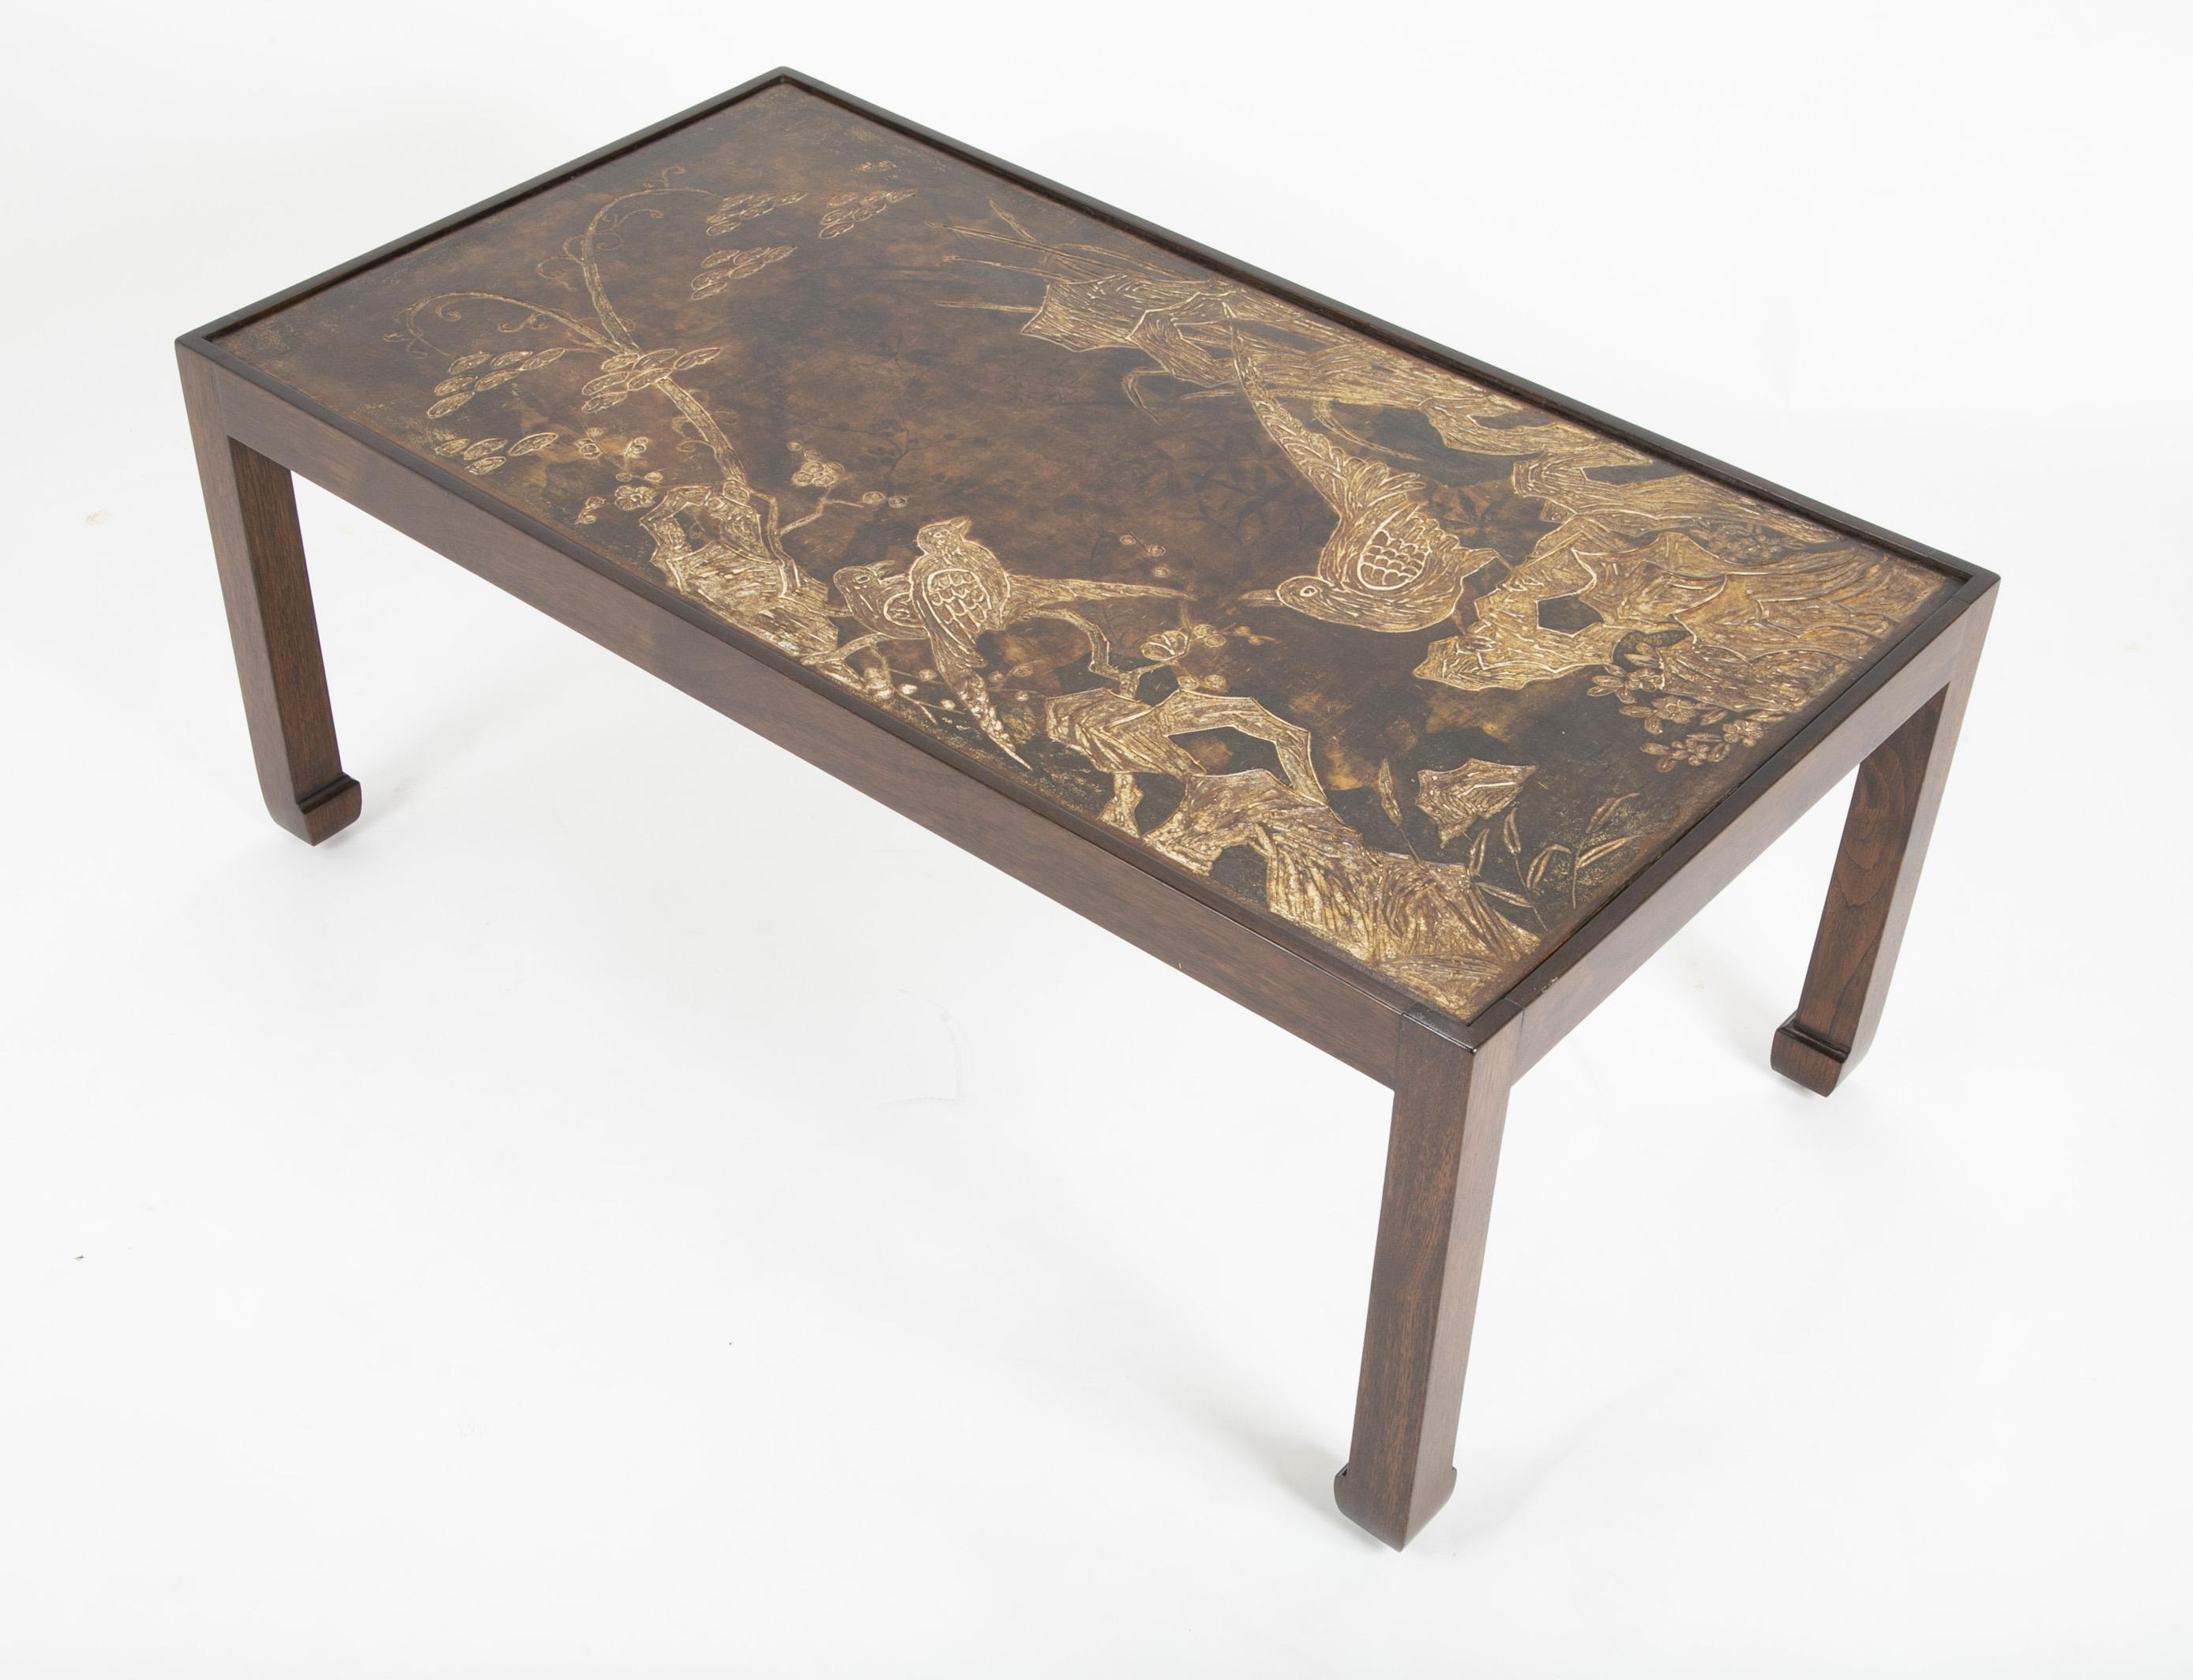 A chinoiserie modern lacquered coffee table by Josef Weilhammer.